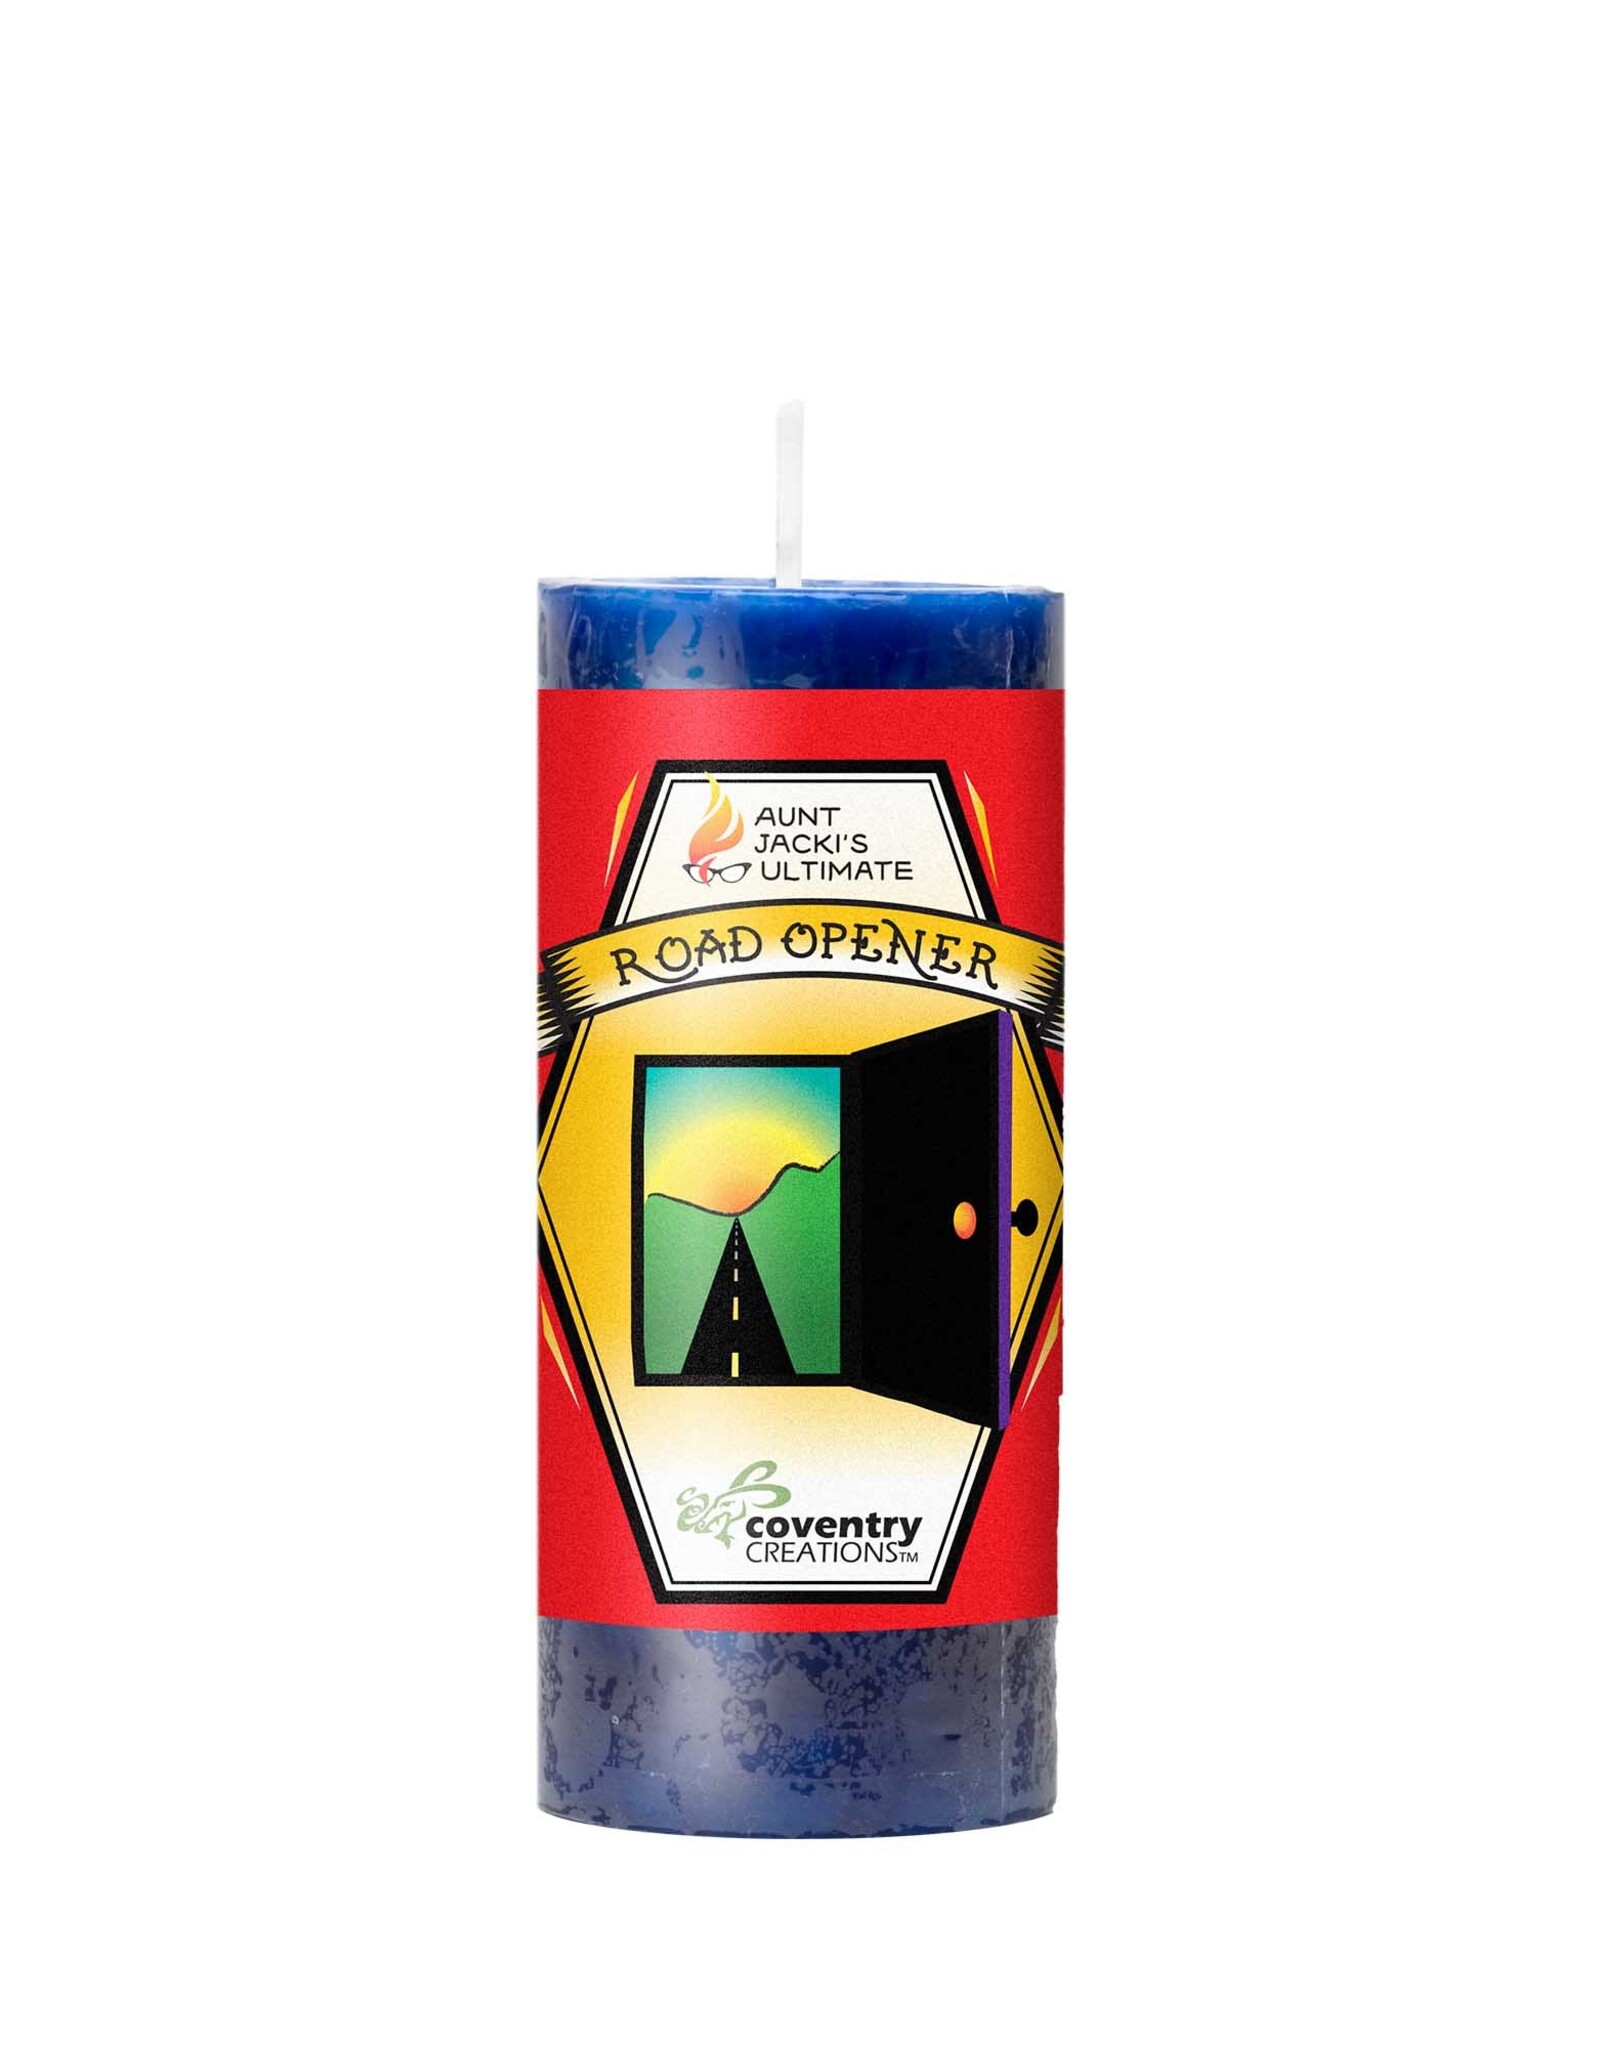 Candle Witch's Brew Limited Edition 2 x 4